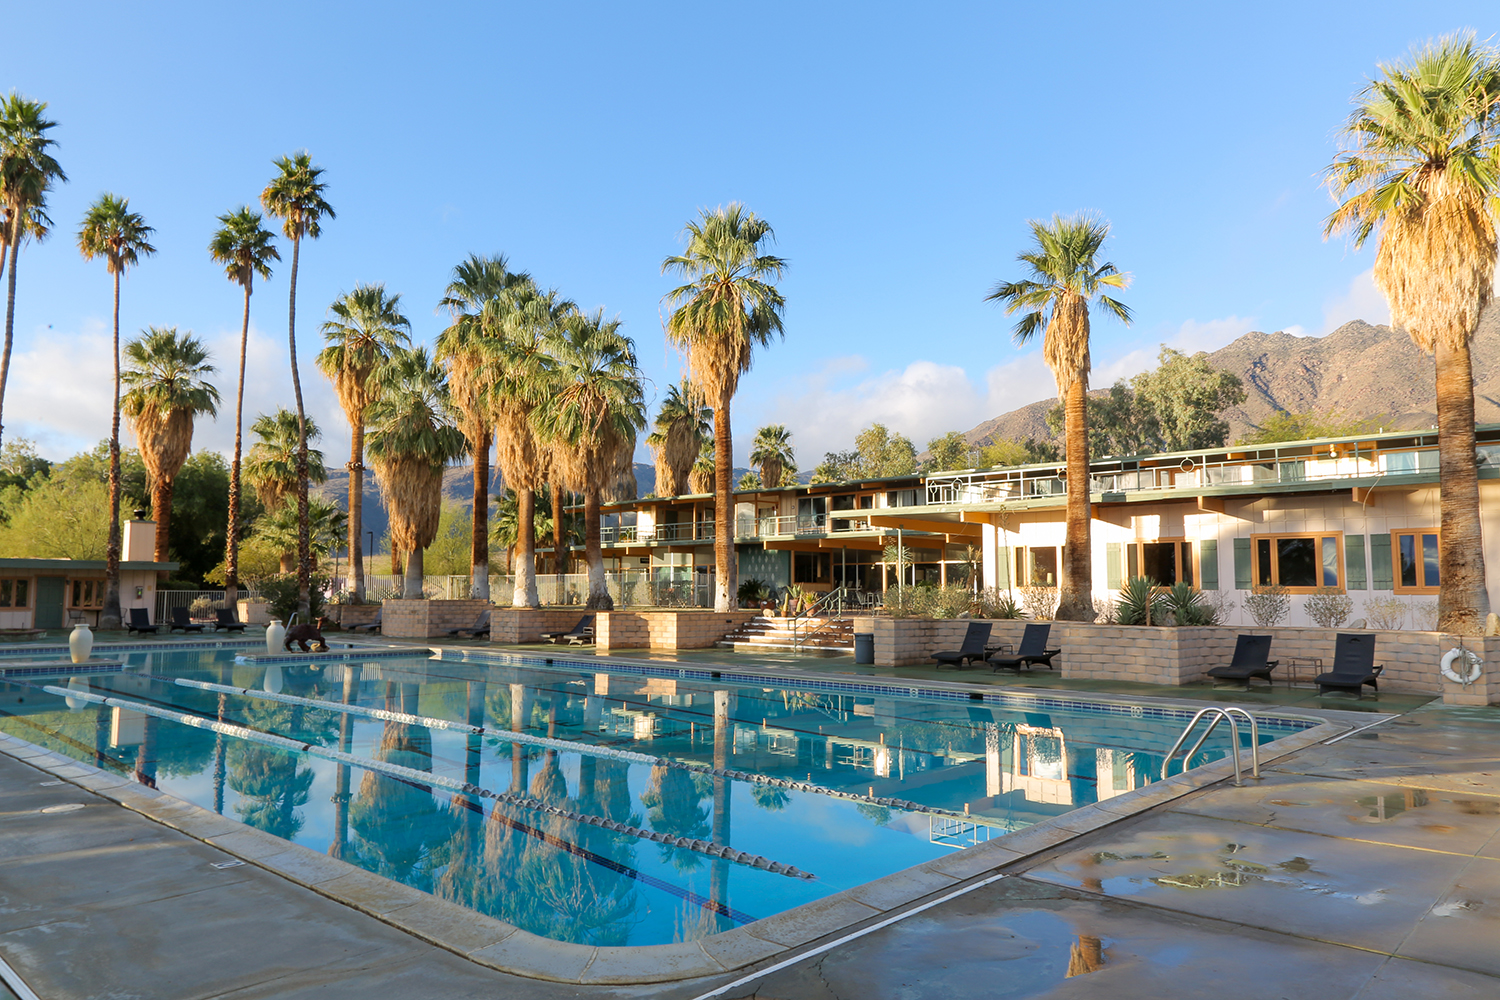 View of an Olympic sized pool with lodging and palm trees alongside at The Palms at Indian Head in Borrego Springs, California.